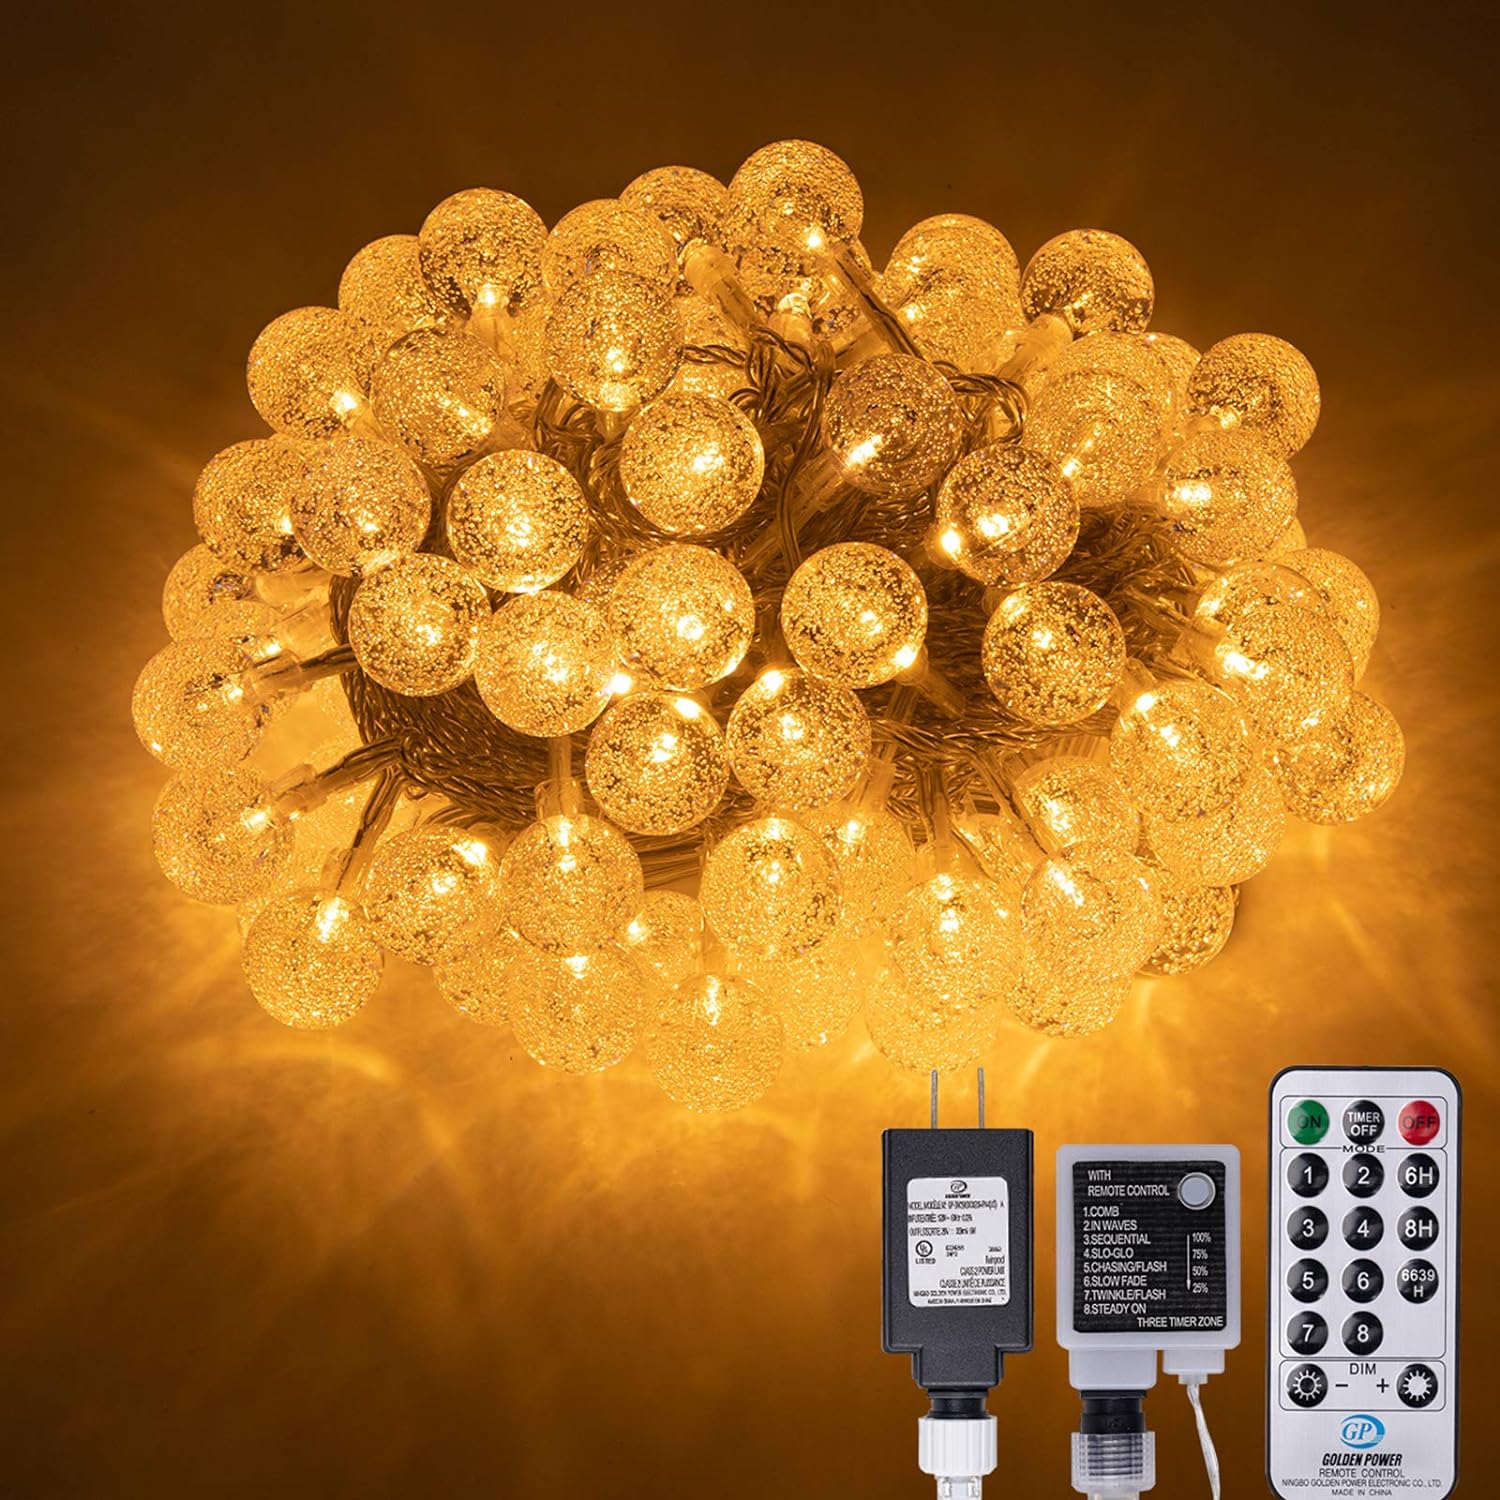 100 LED 49 FT Globe Ball String Lights Crystal Bubble Ball Fairy String Lights Plug in with Remote 8 Modes Extendable for Indoor Outdoor Wedding Christmas Tree Garden Decor (Warm White)